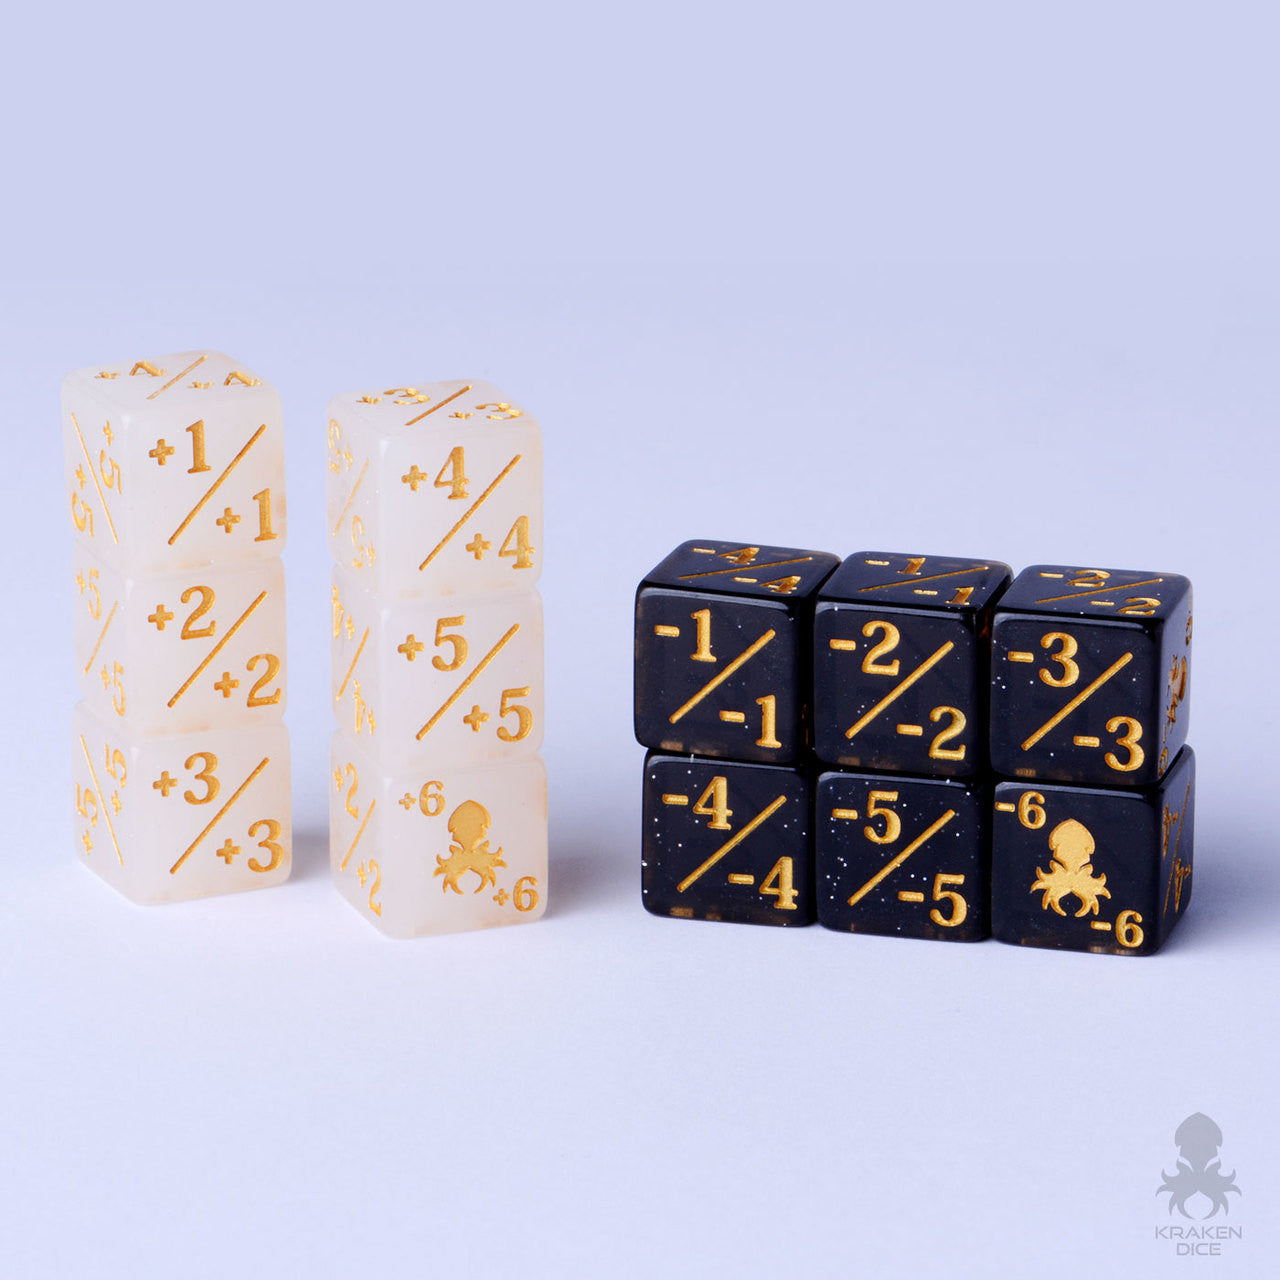 Kraken Logo Positive/Negative Dice Counters for Magic: The Gathering 12pc Pack